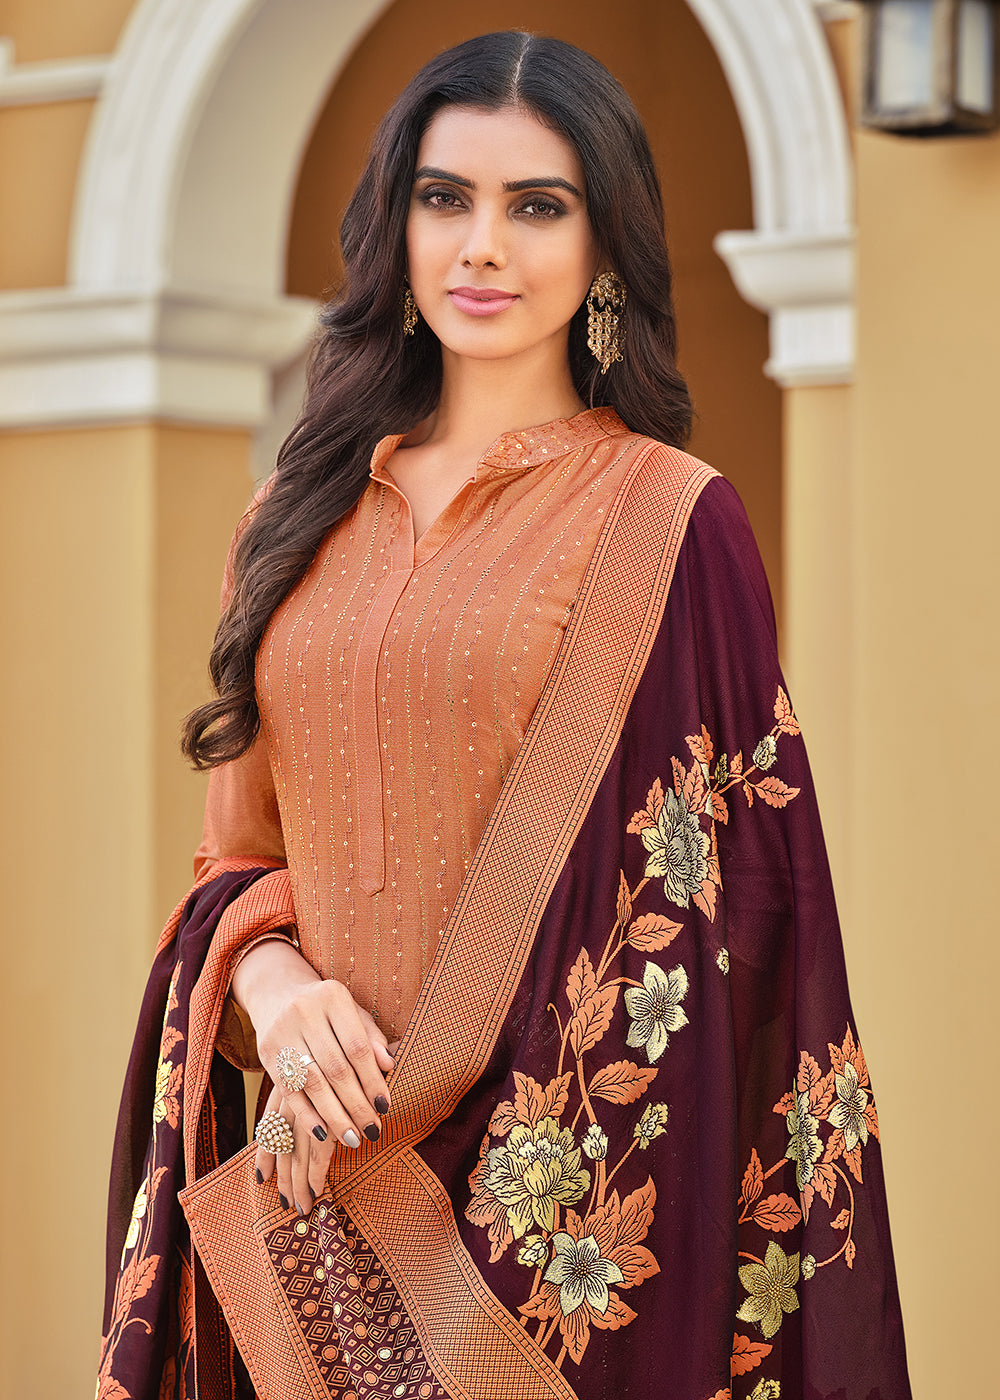 Buy Now Swarovski Embroidered Beatific Peach Pant Salwar Suit Online in USA, UK, Canada & Worldwide at Empress Clothing.